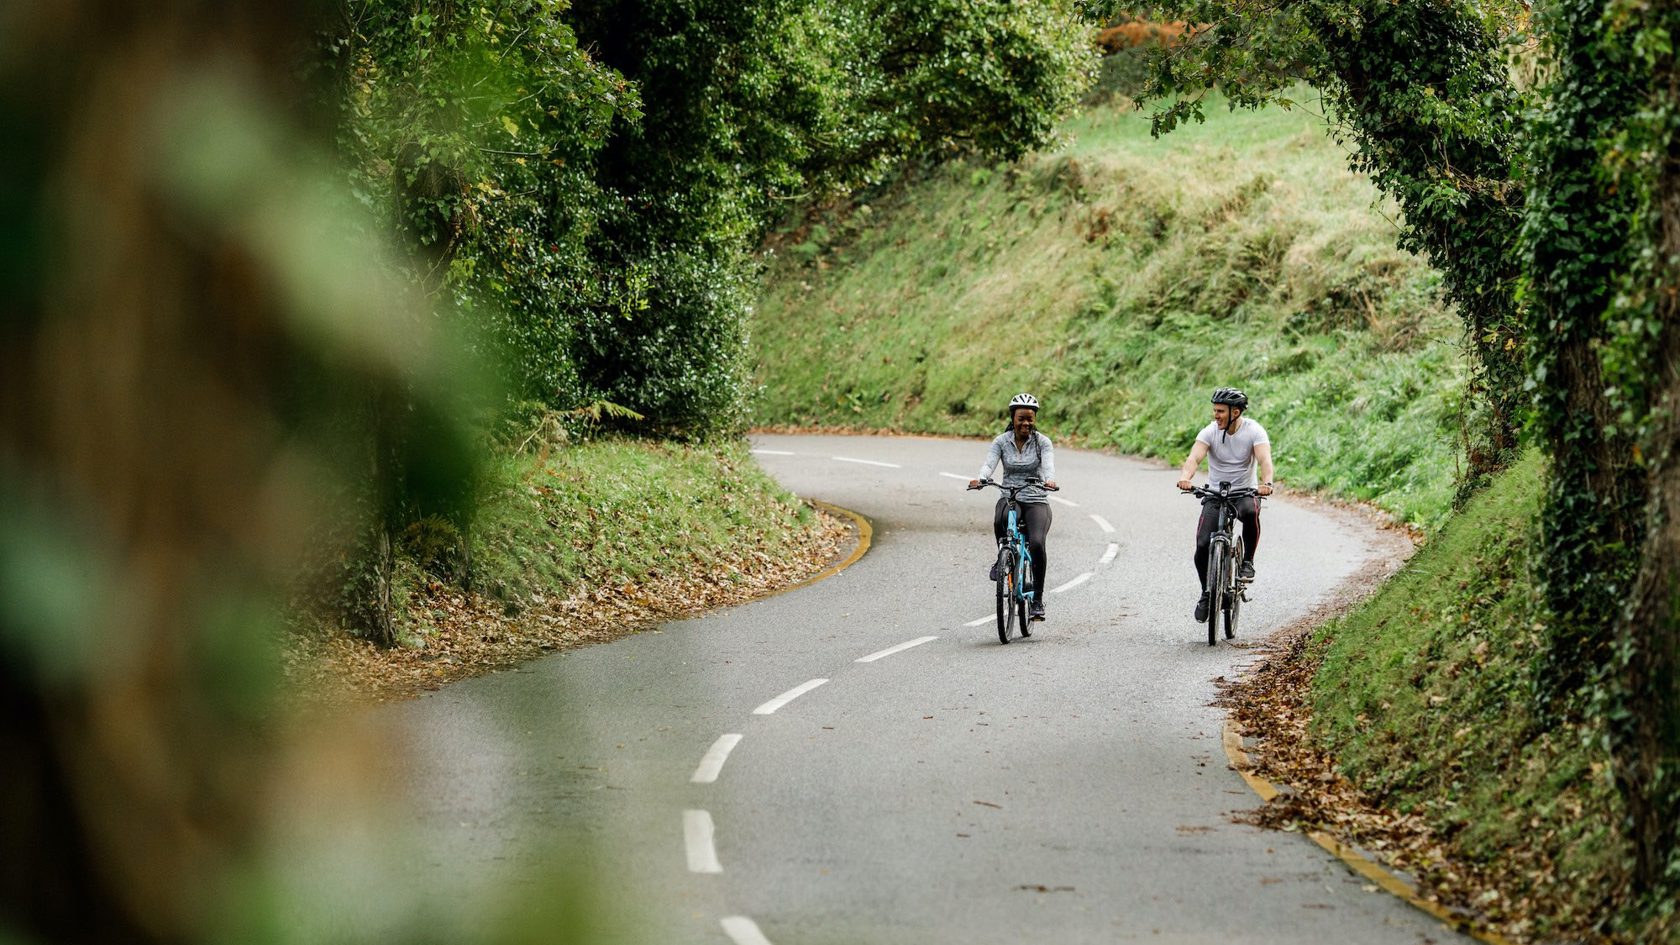 Two people ride electric bikes on quiet country road